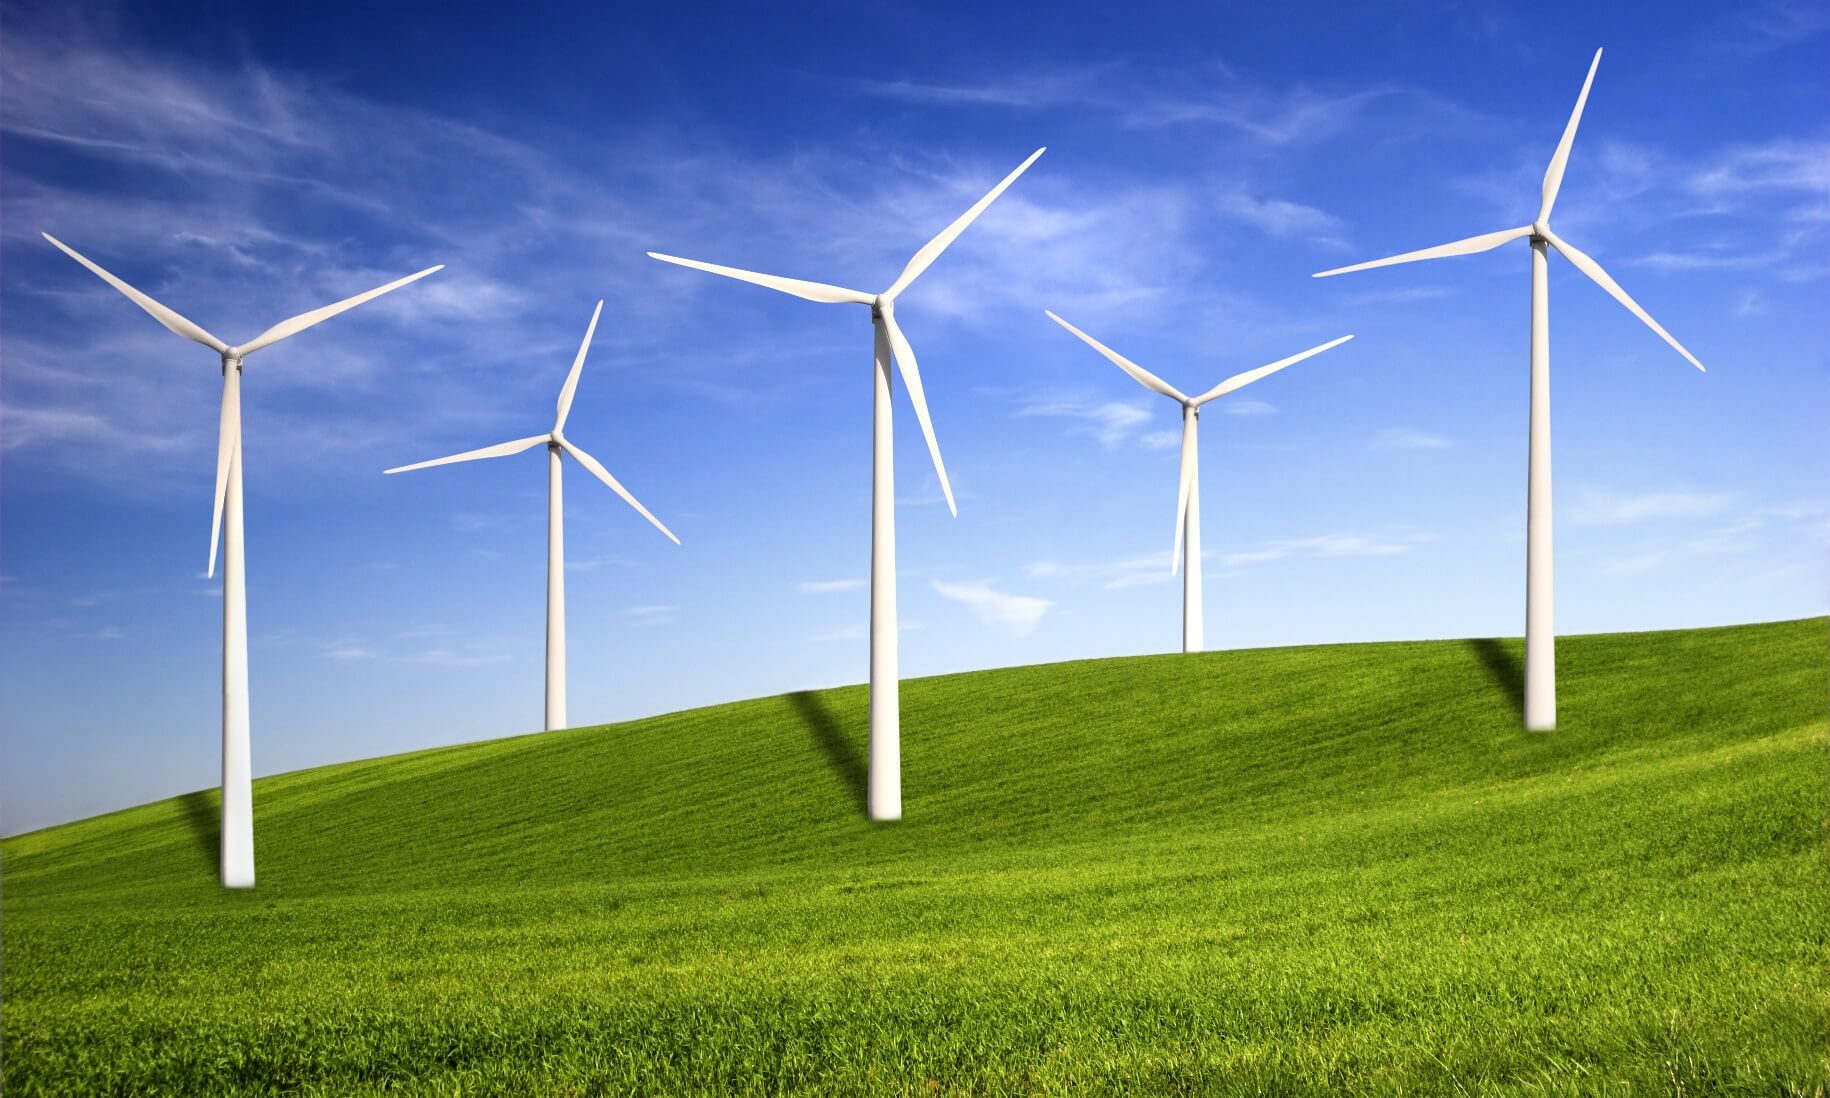 Beautiful green meadow with wind turbines generating electricity